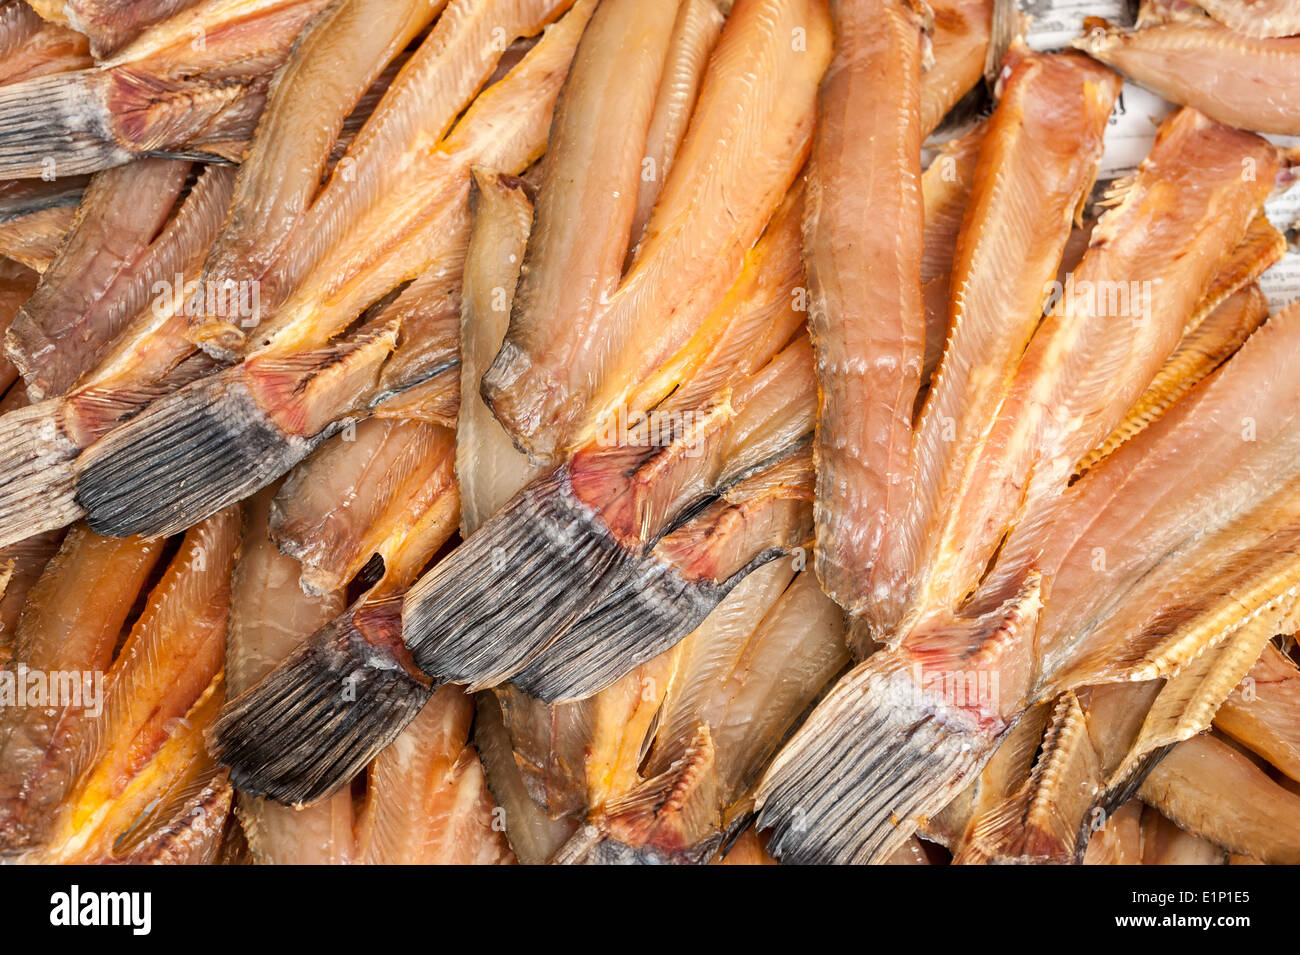 Dried fish for sale at asian food market Stock Photo